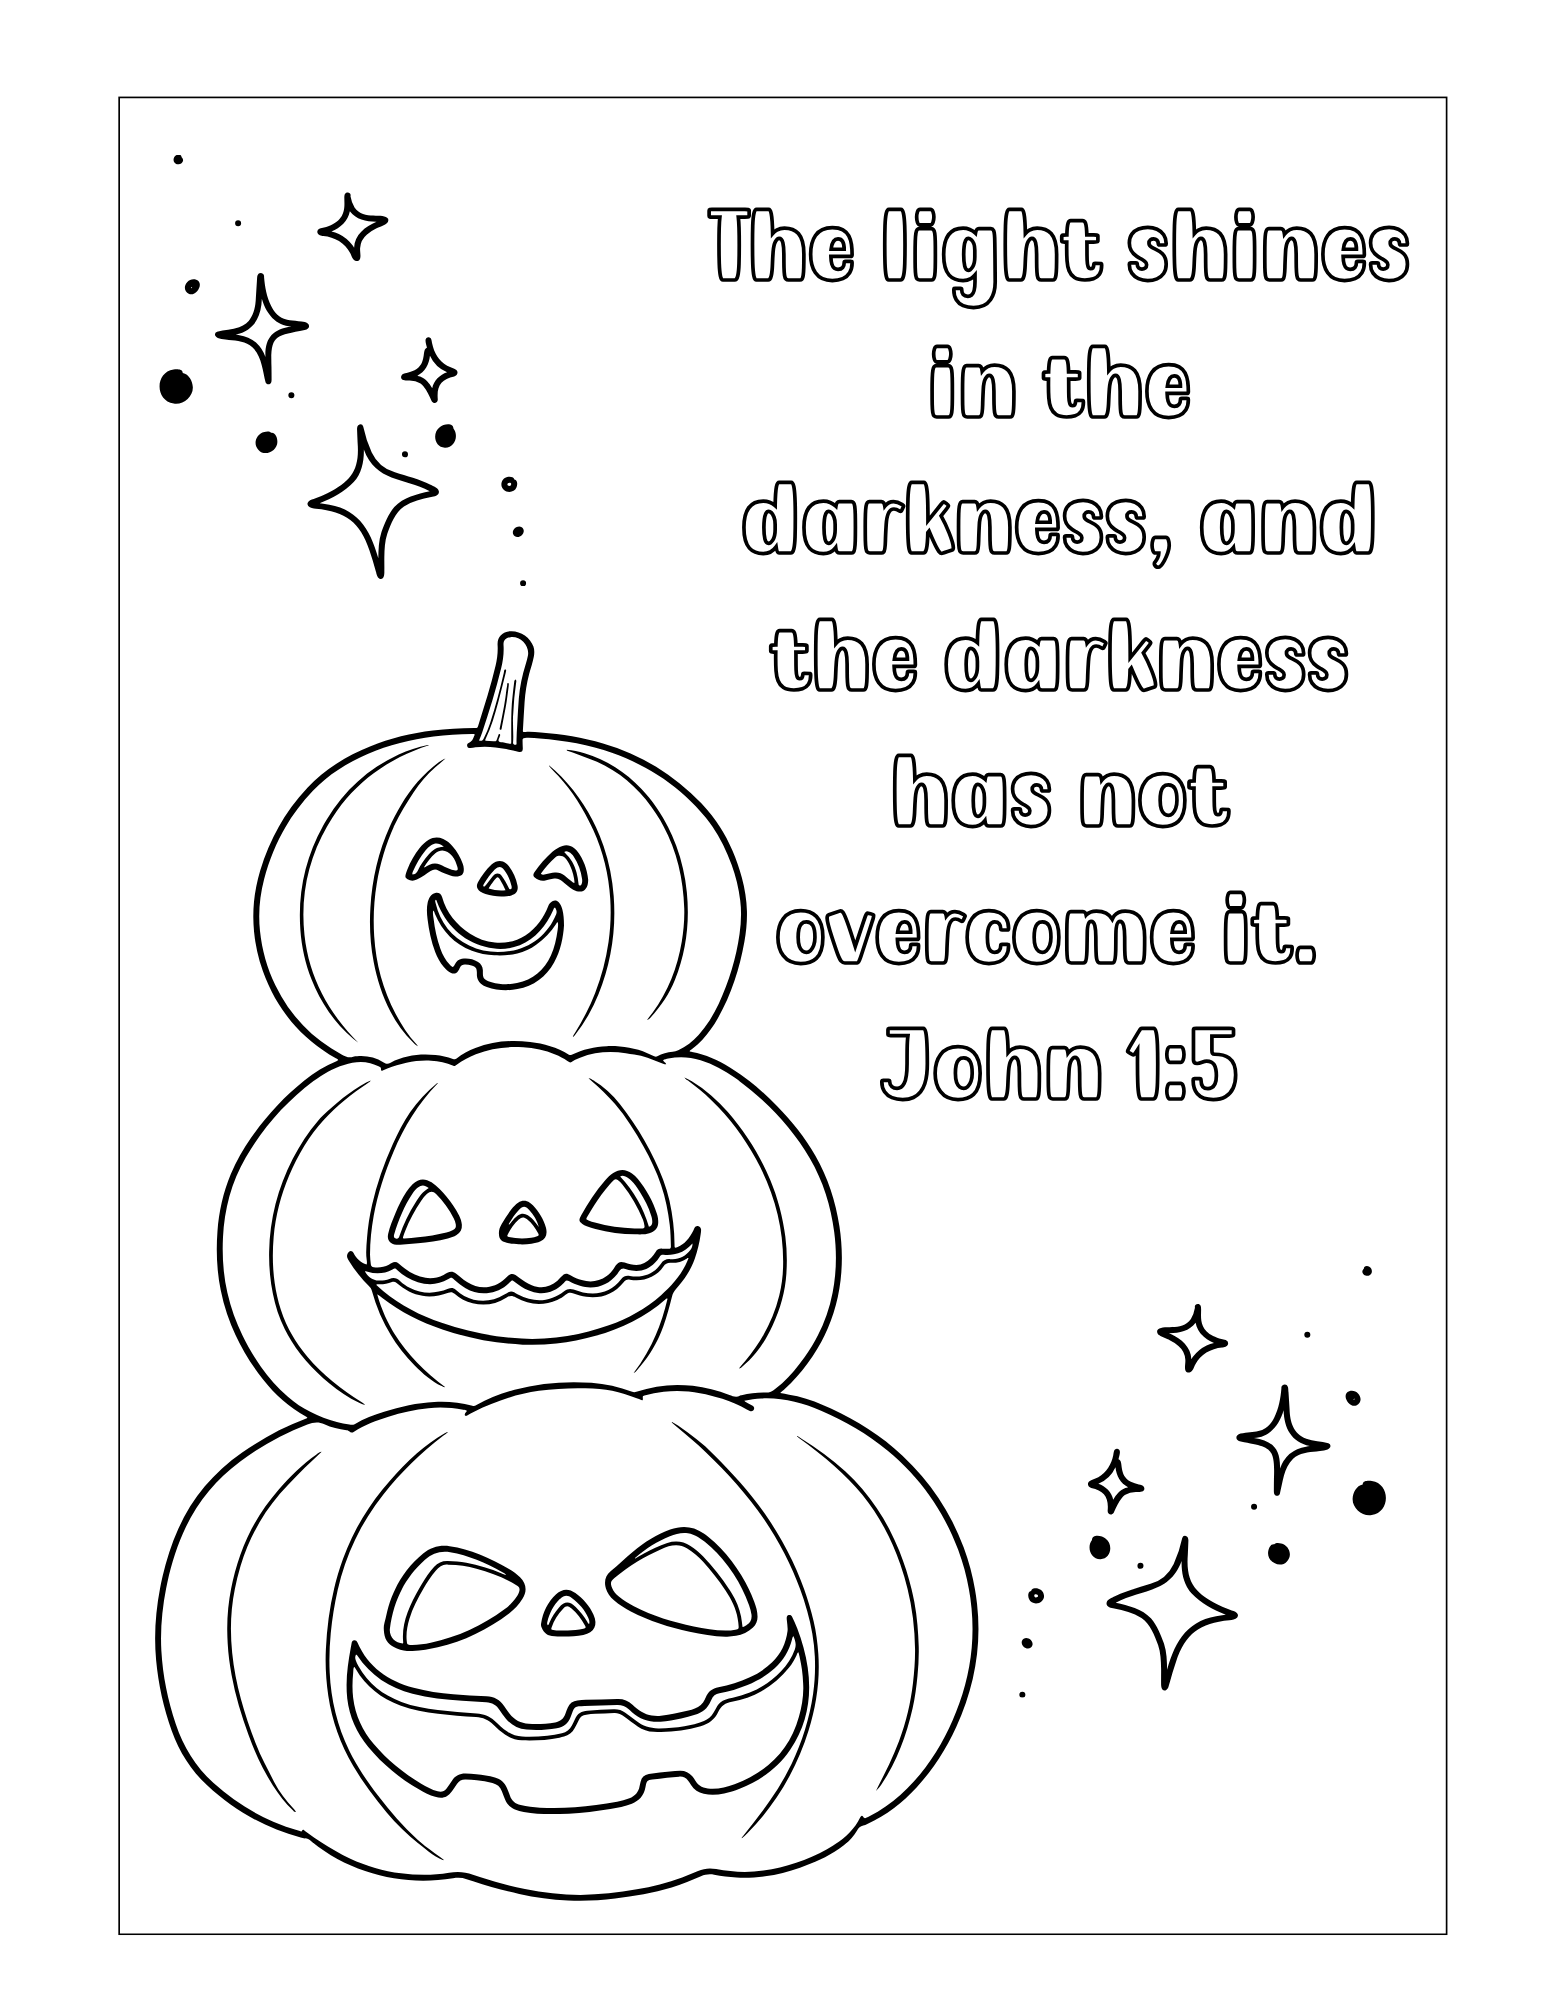 Free Printable Christian Halloween Coloring Pages - Out Upon the Waters